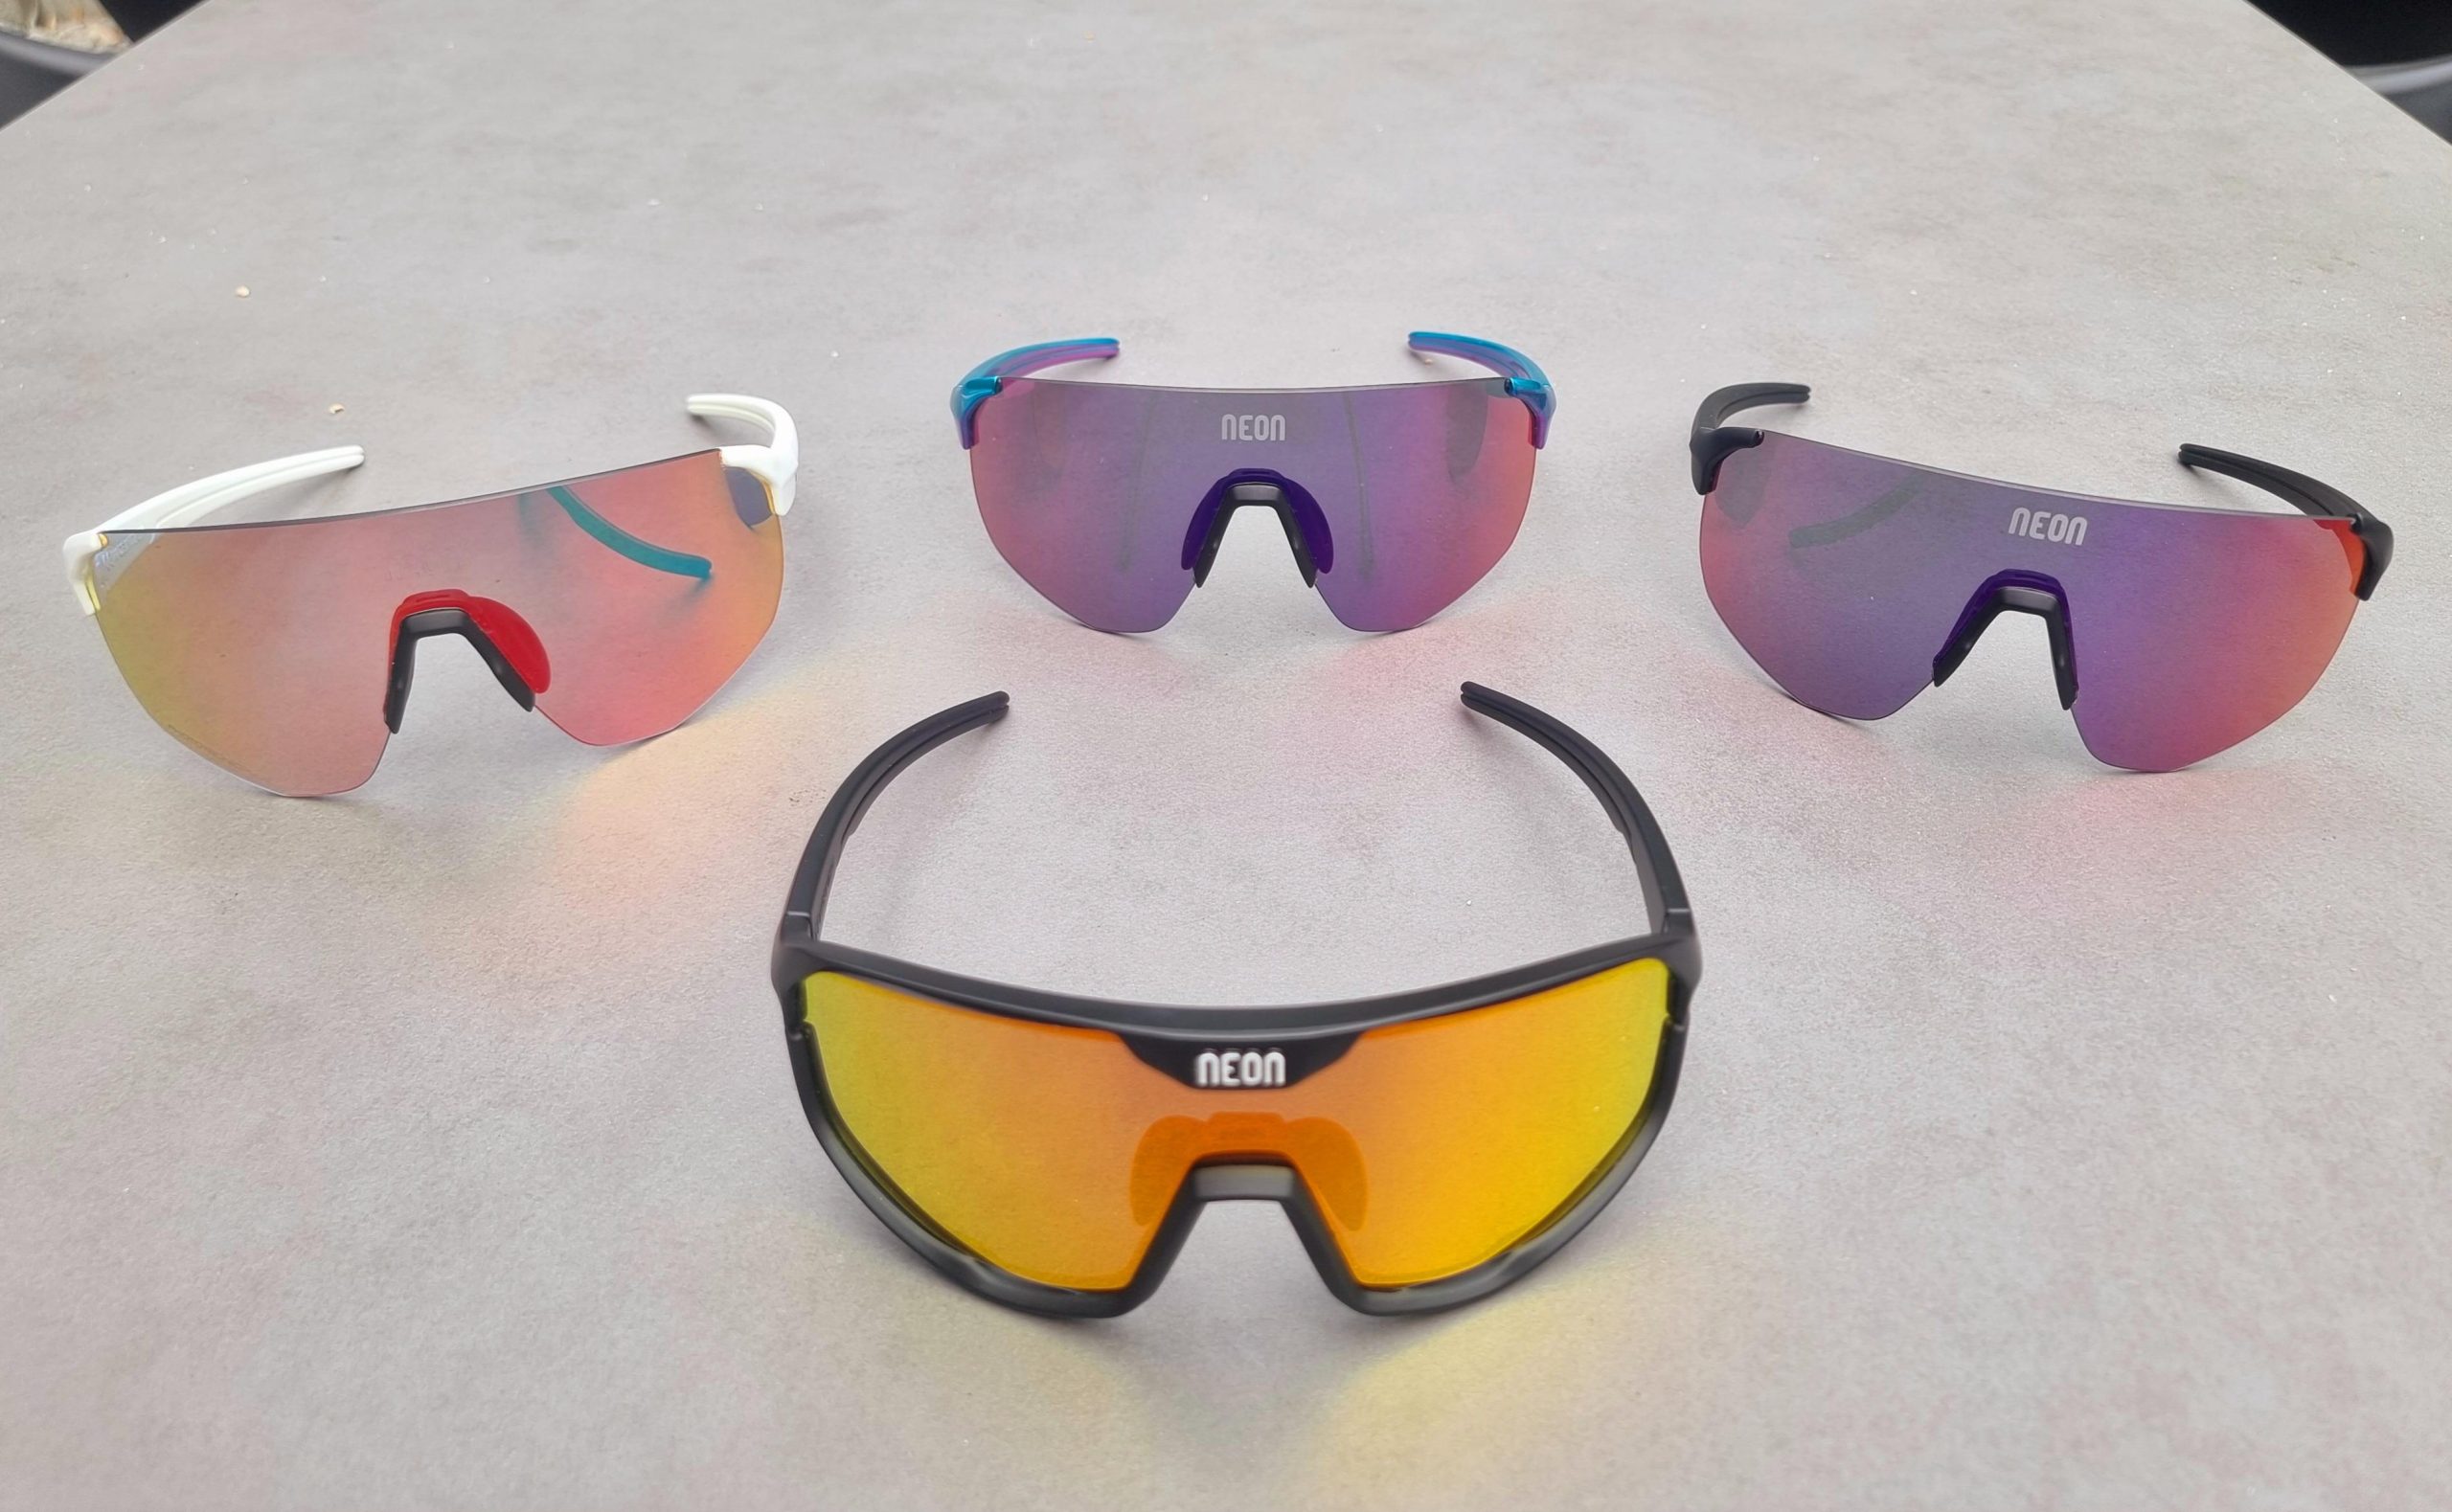 Neon Optic Cycling Sunglasses Review